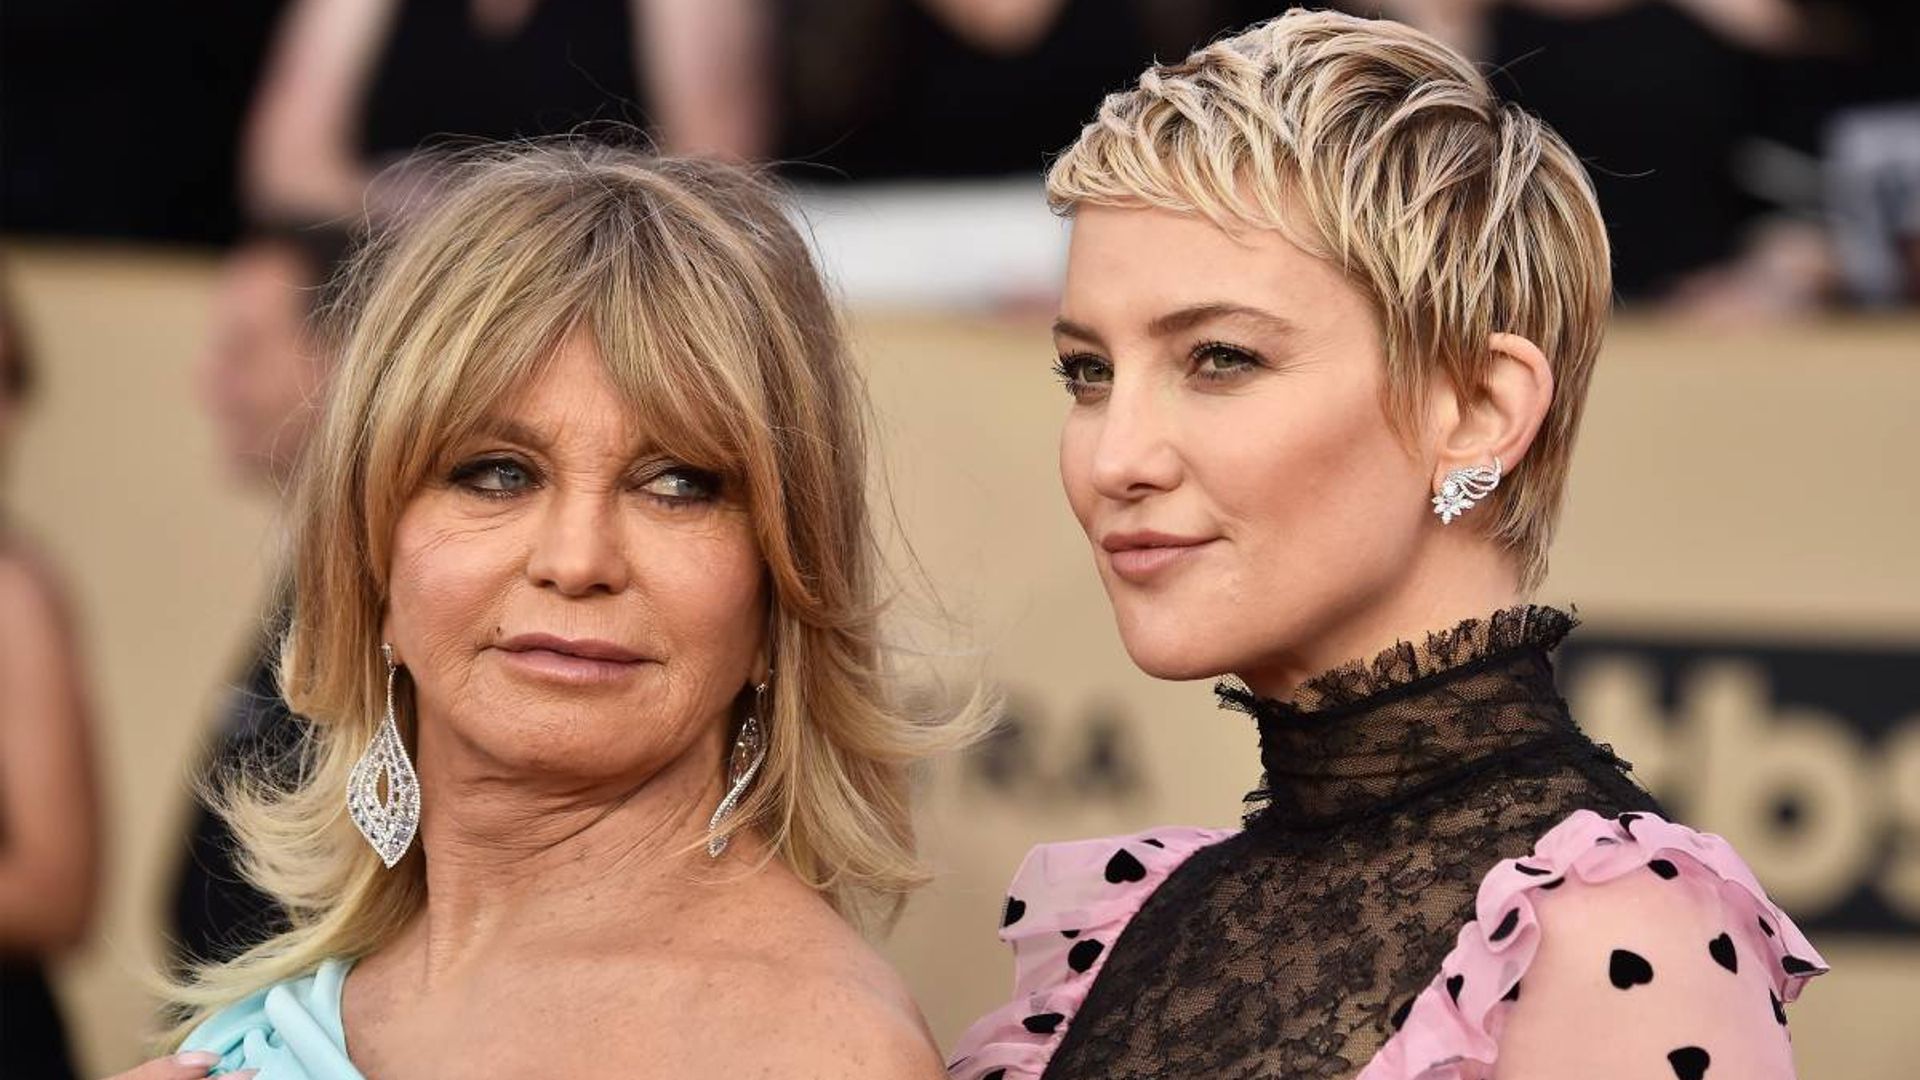 Kate Hudson details lessons she learned from Goldie Hawn: 'Mom is really onto something'